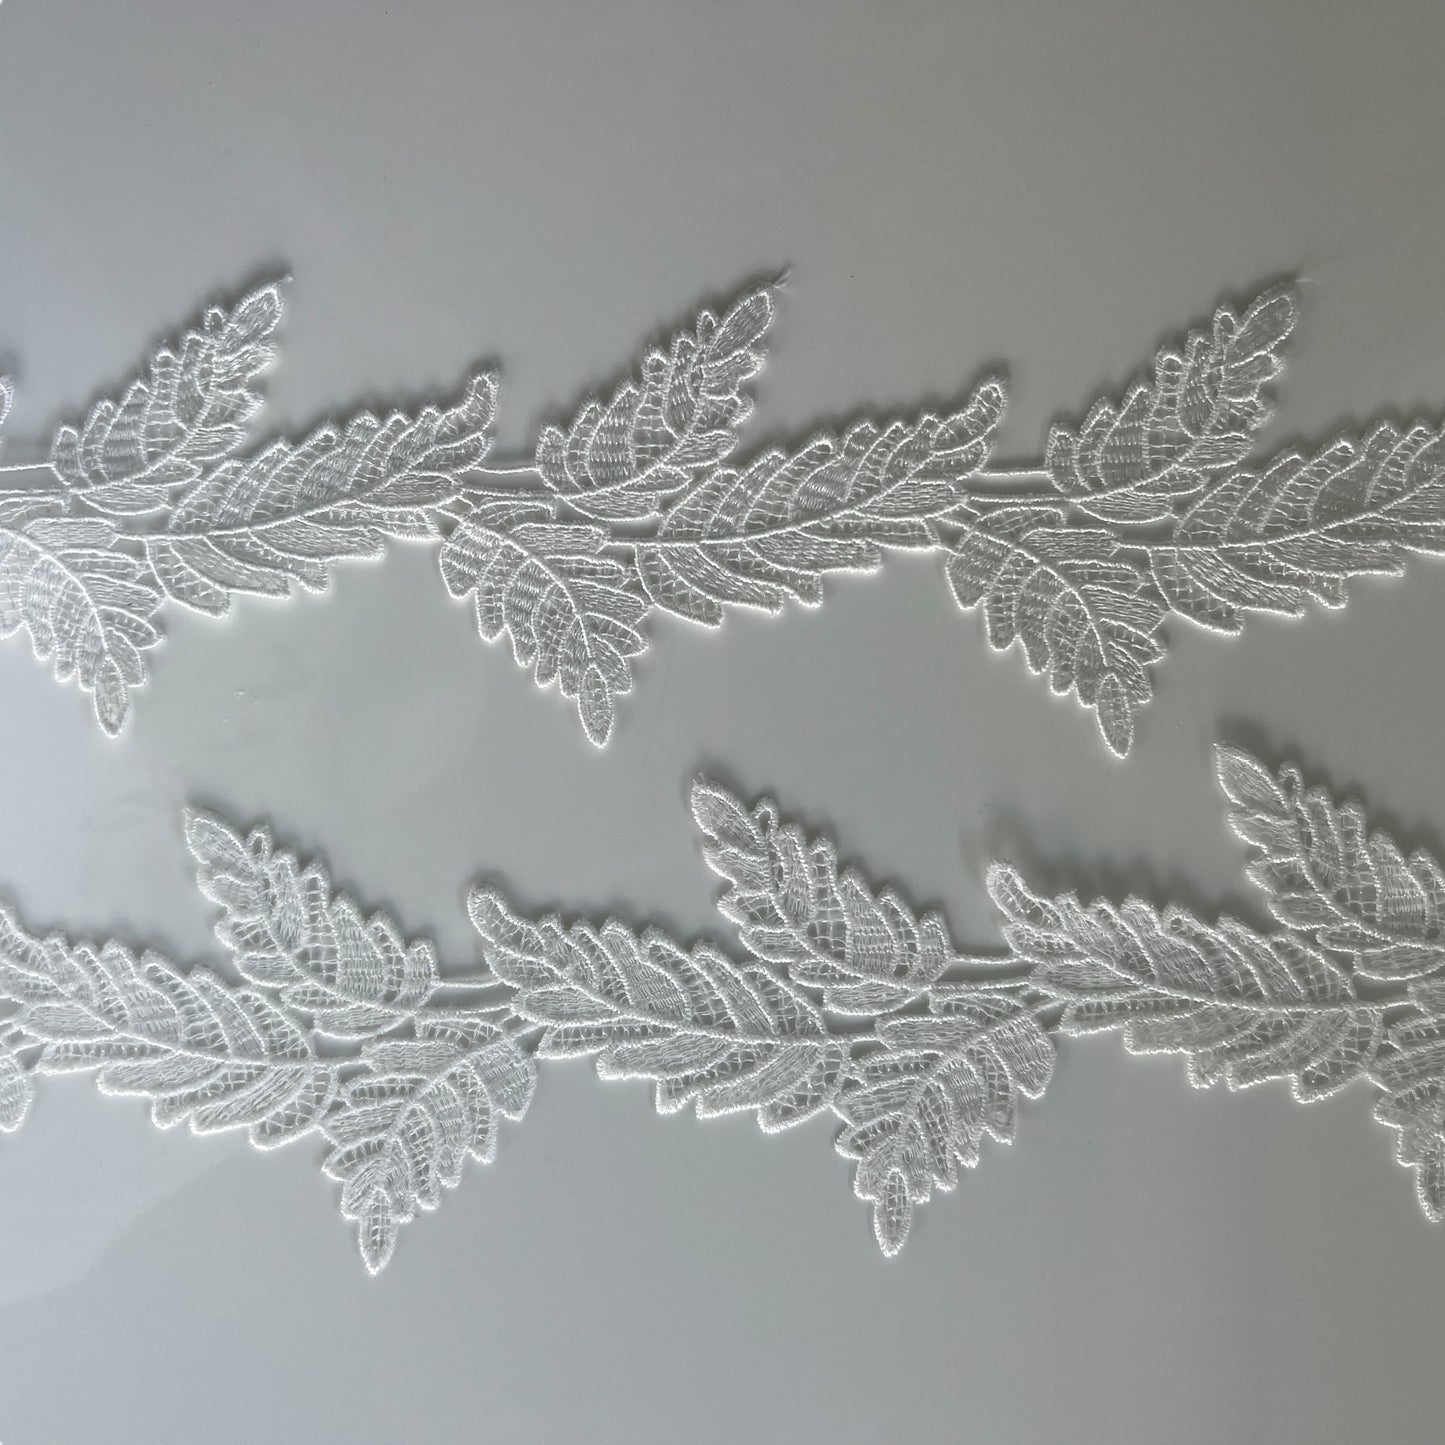 Embroidered Lace